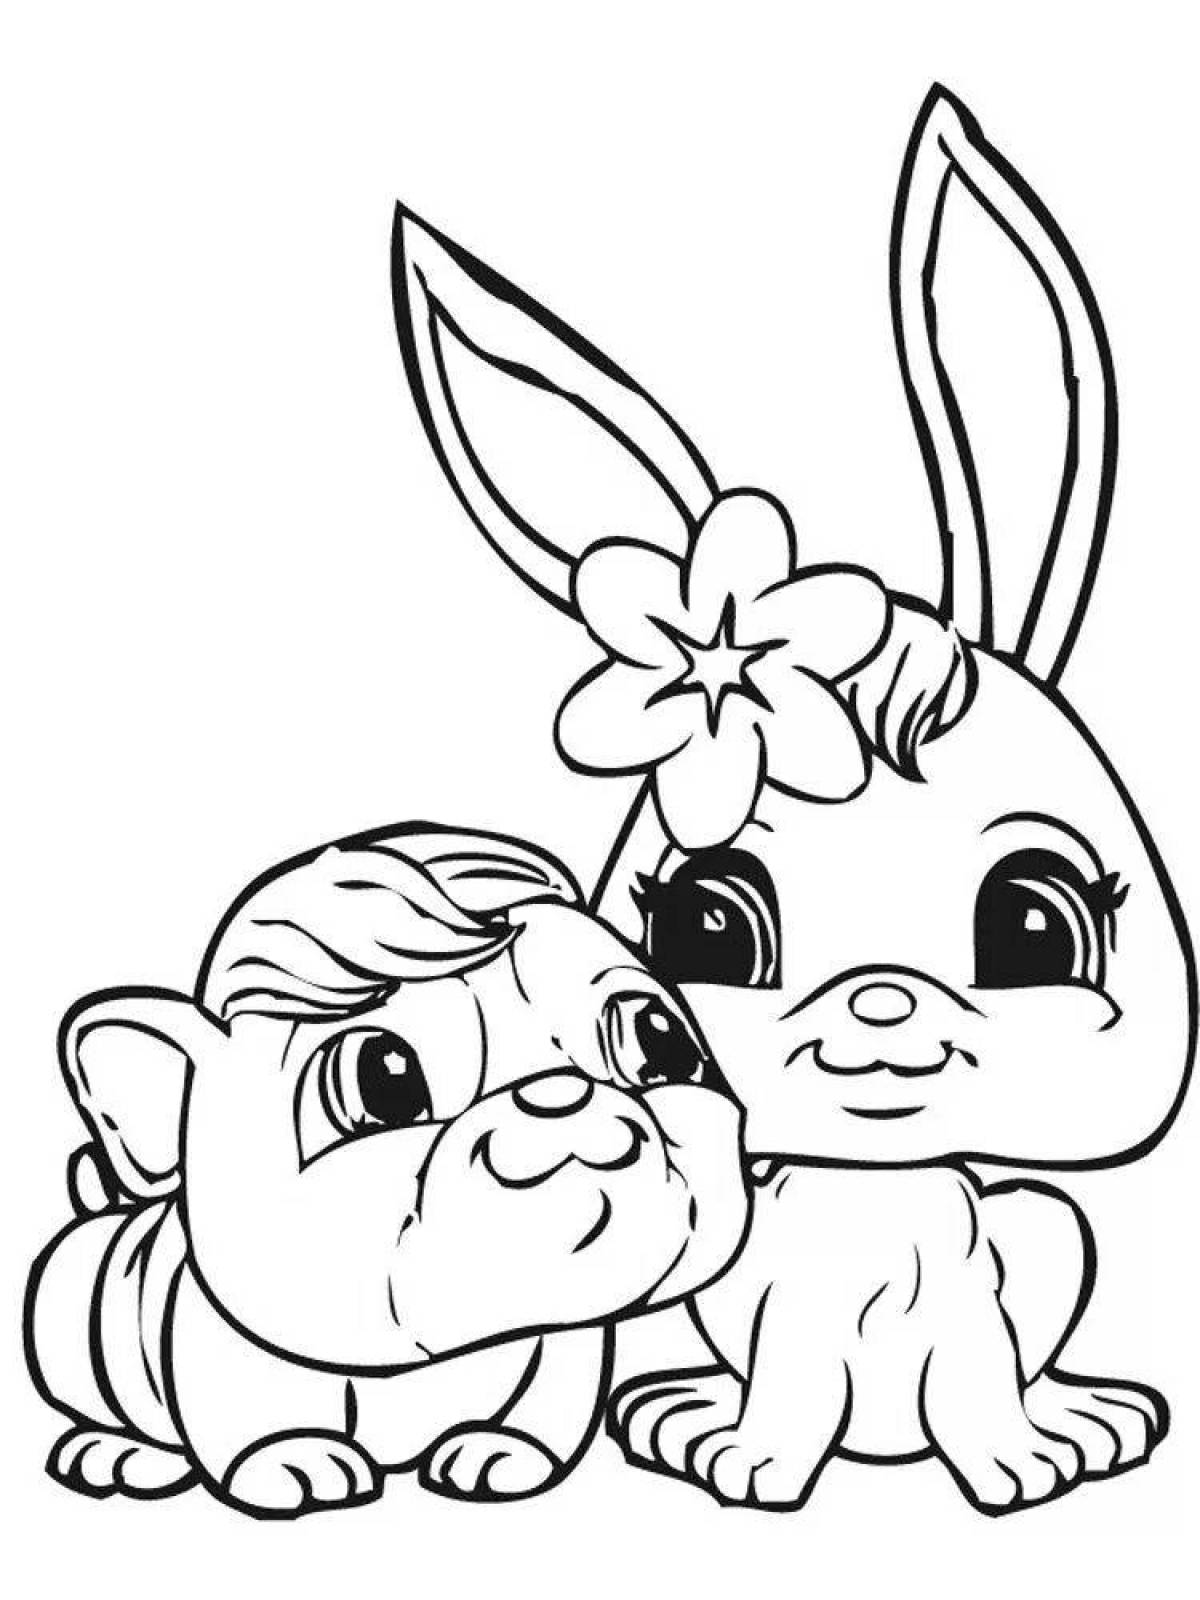 Coloring page playful cat and hare